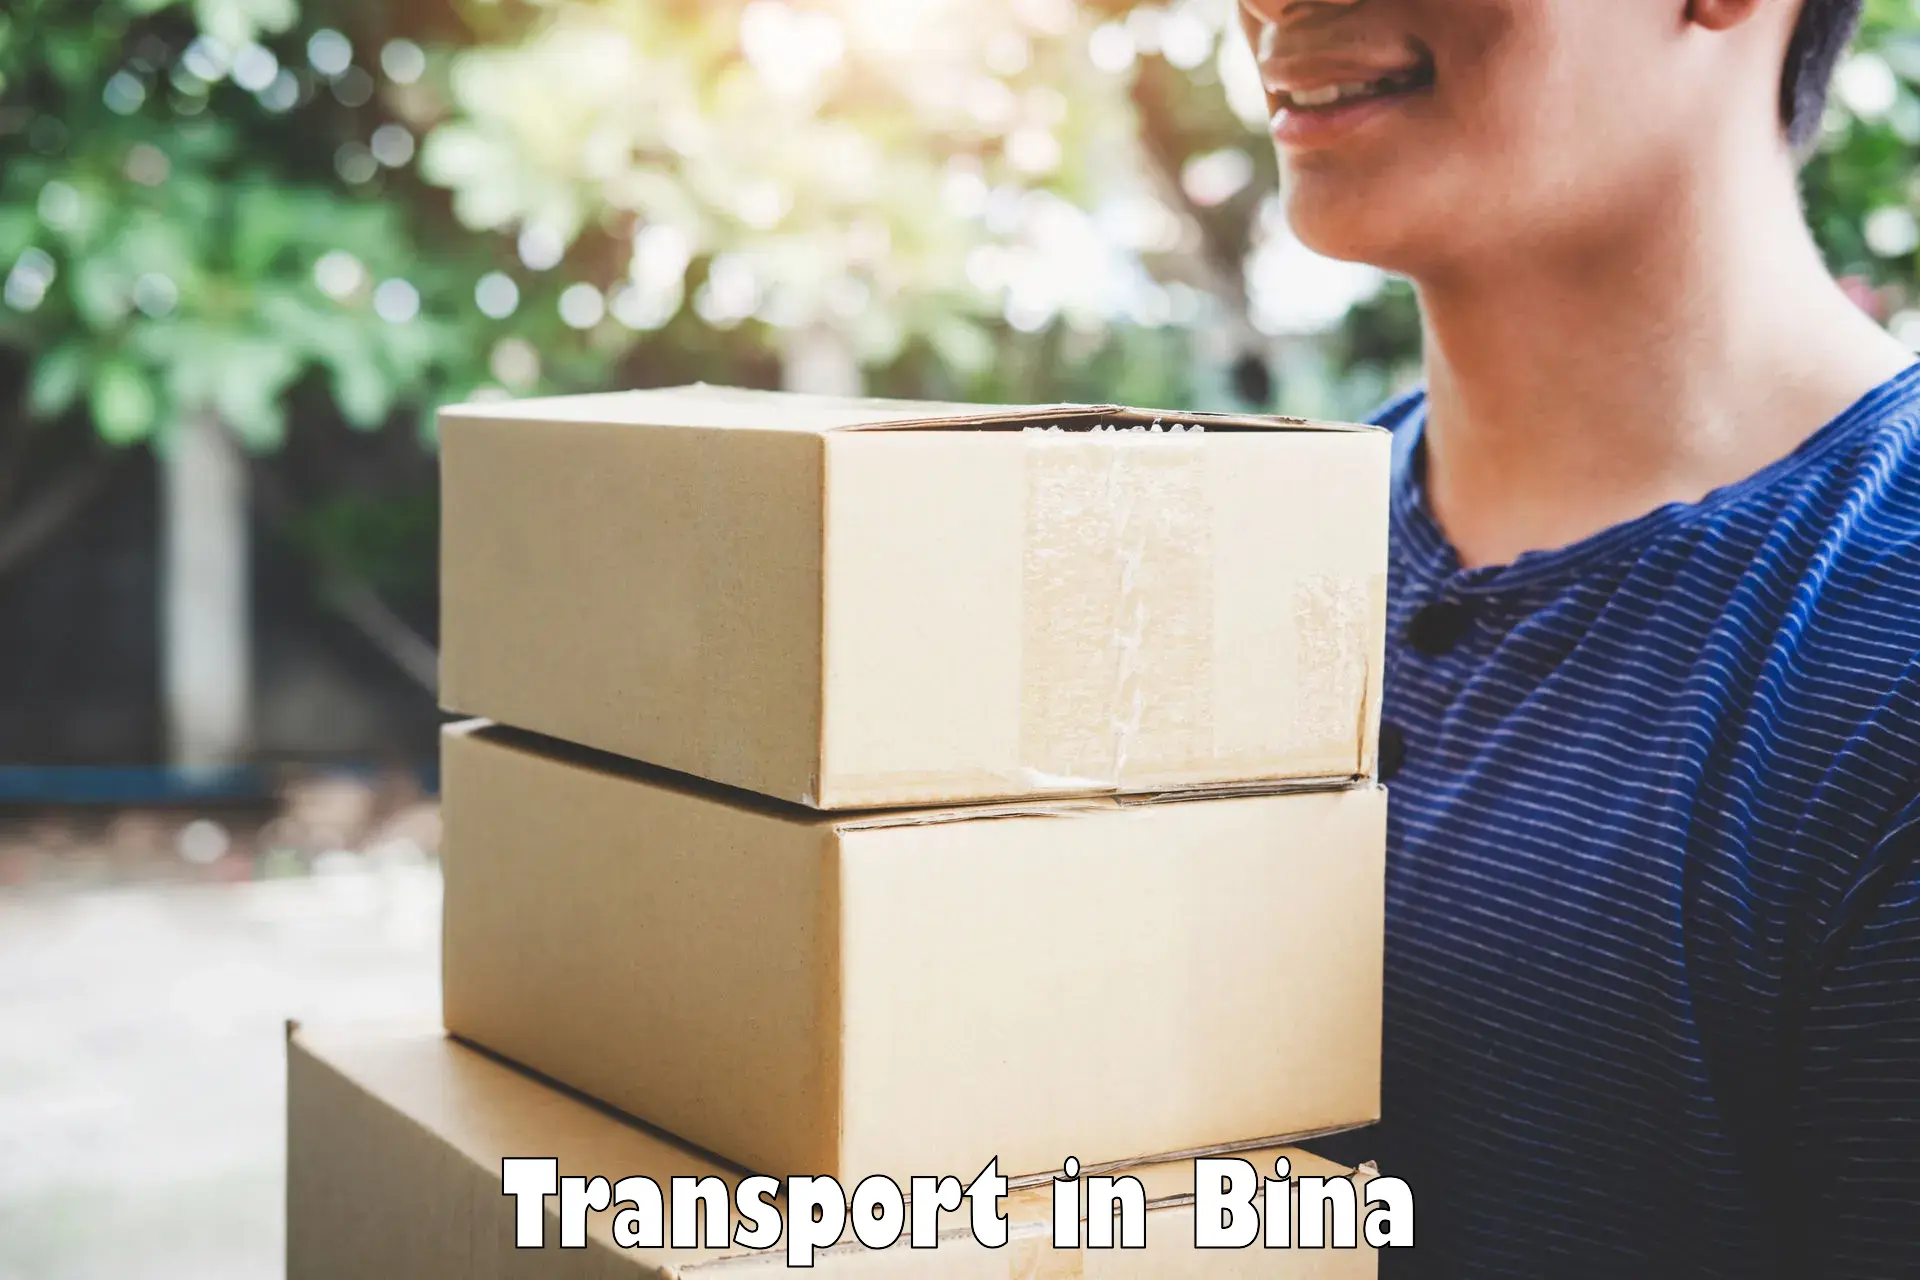 Land transport services in Bina